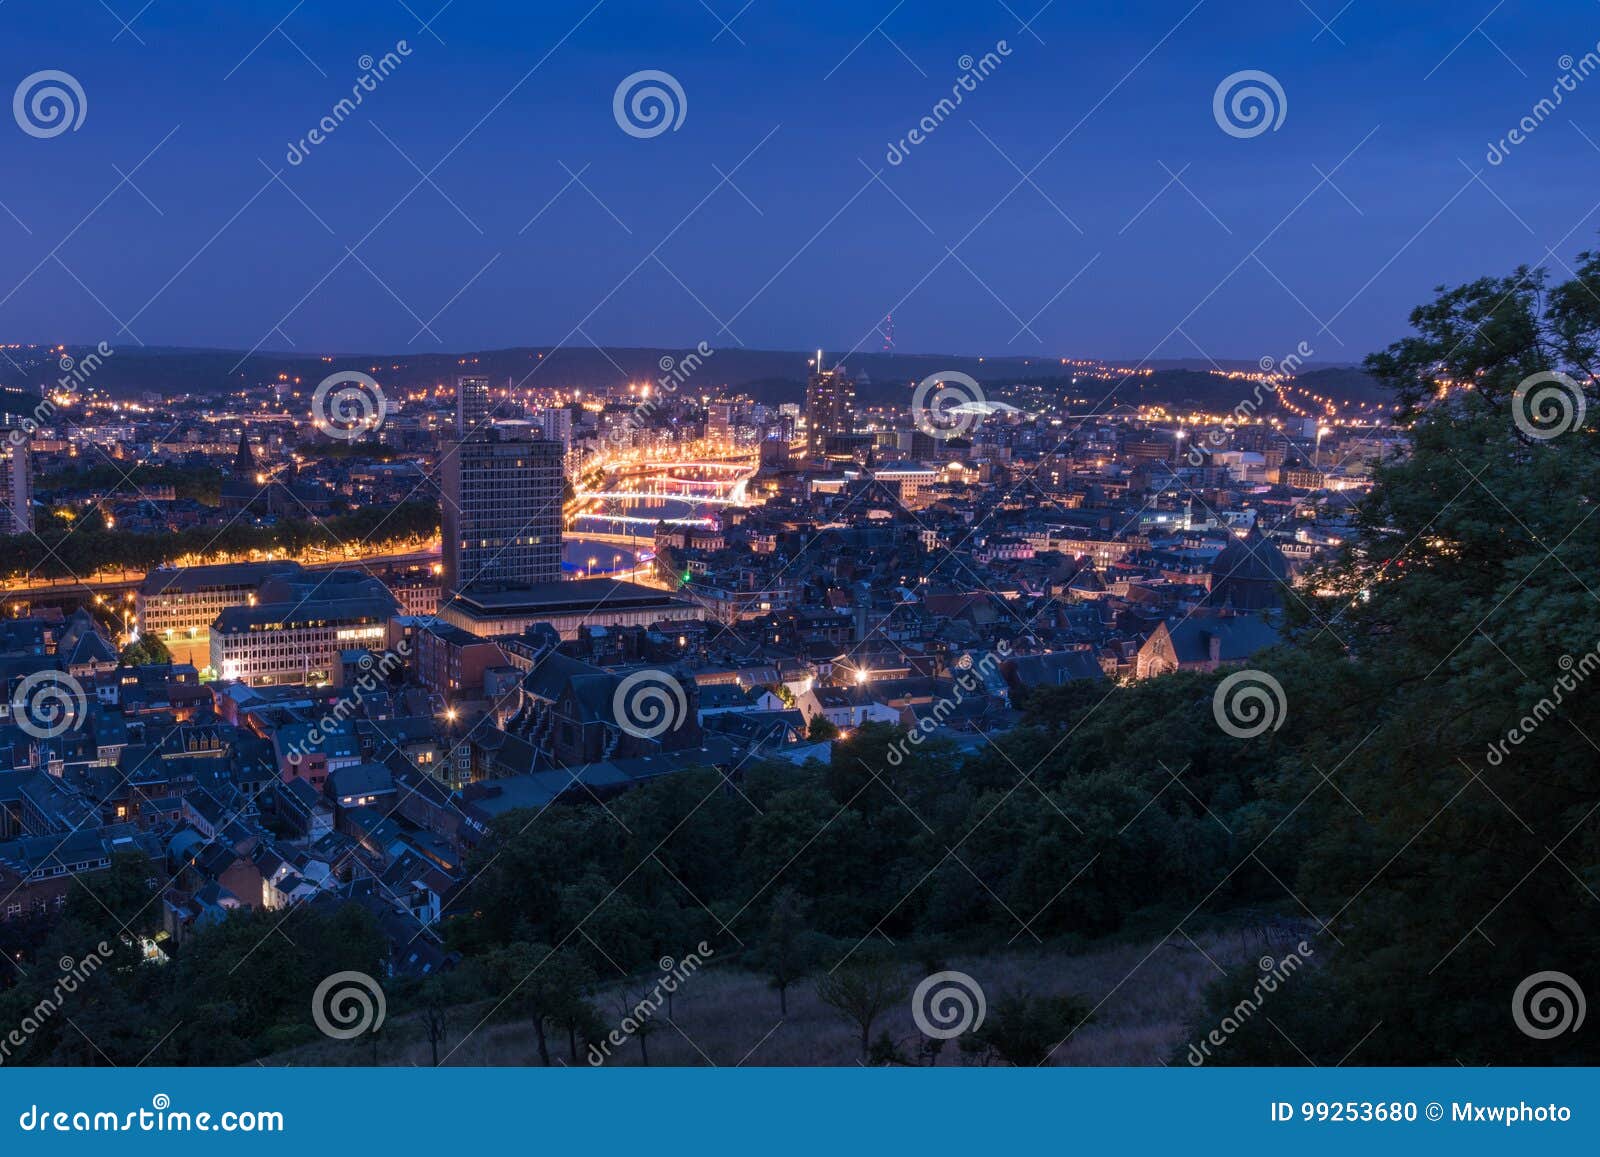 Blue Hour Over the City of Liege Belgium Stock Photo - Image of liege ...